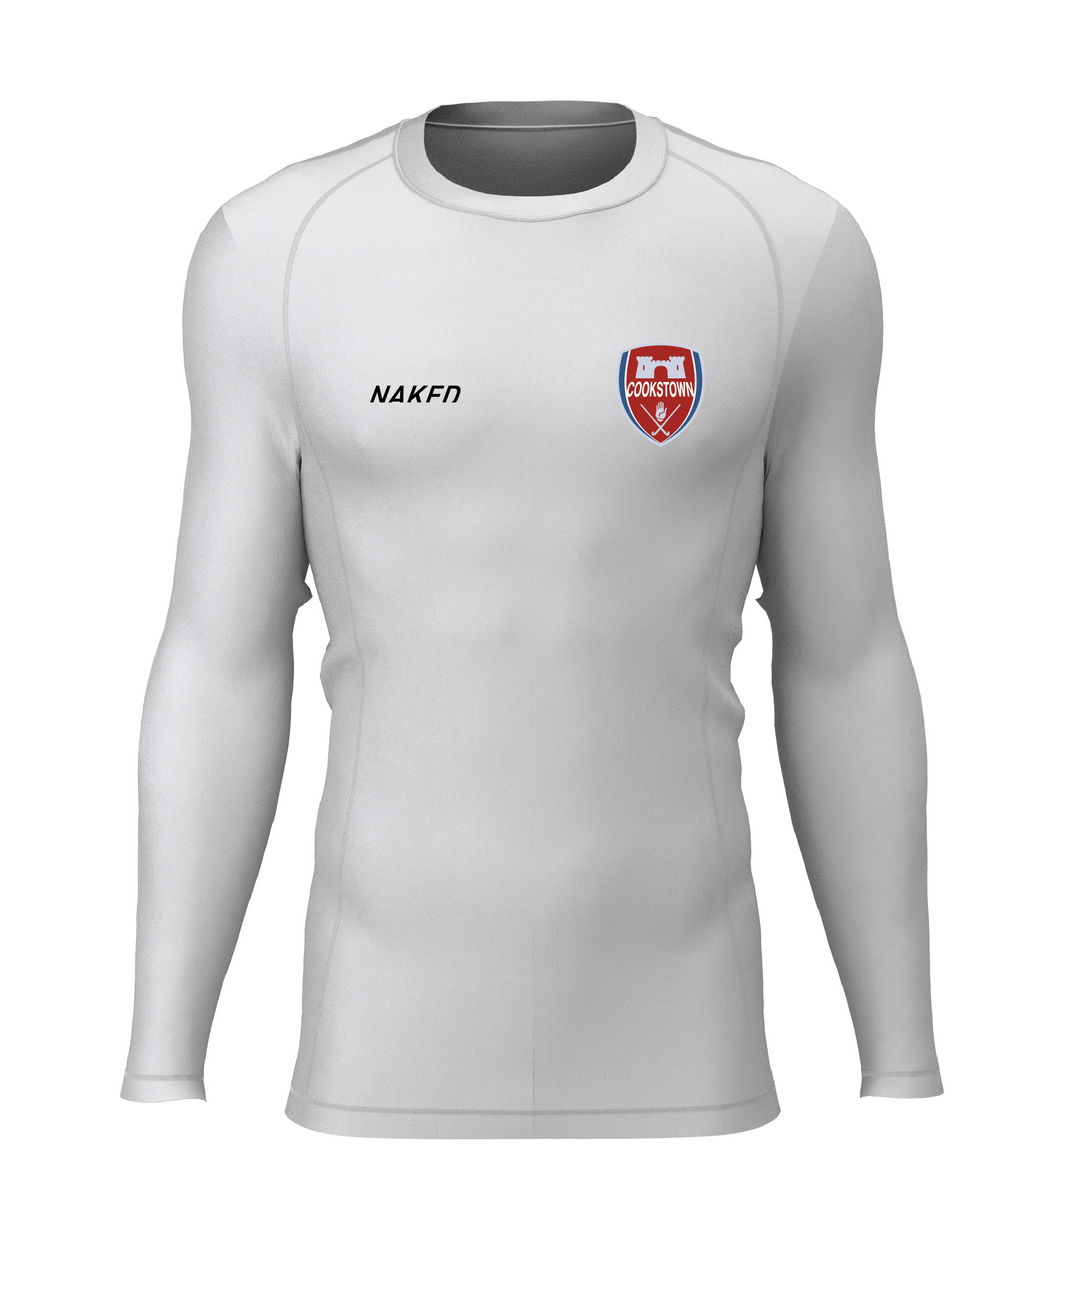 Cookstown Adult Baselayer